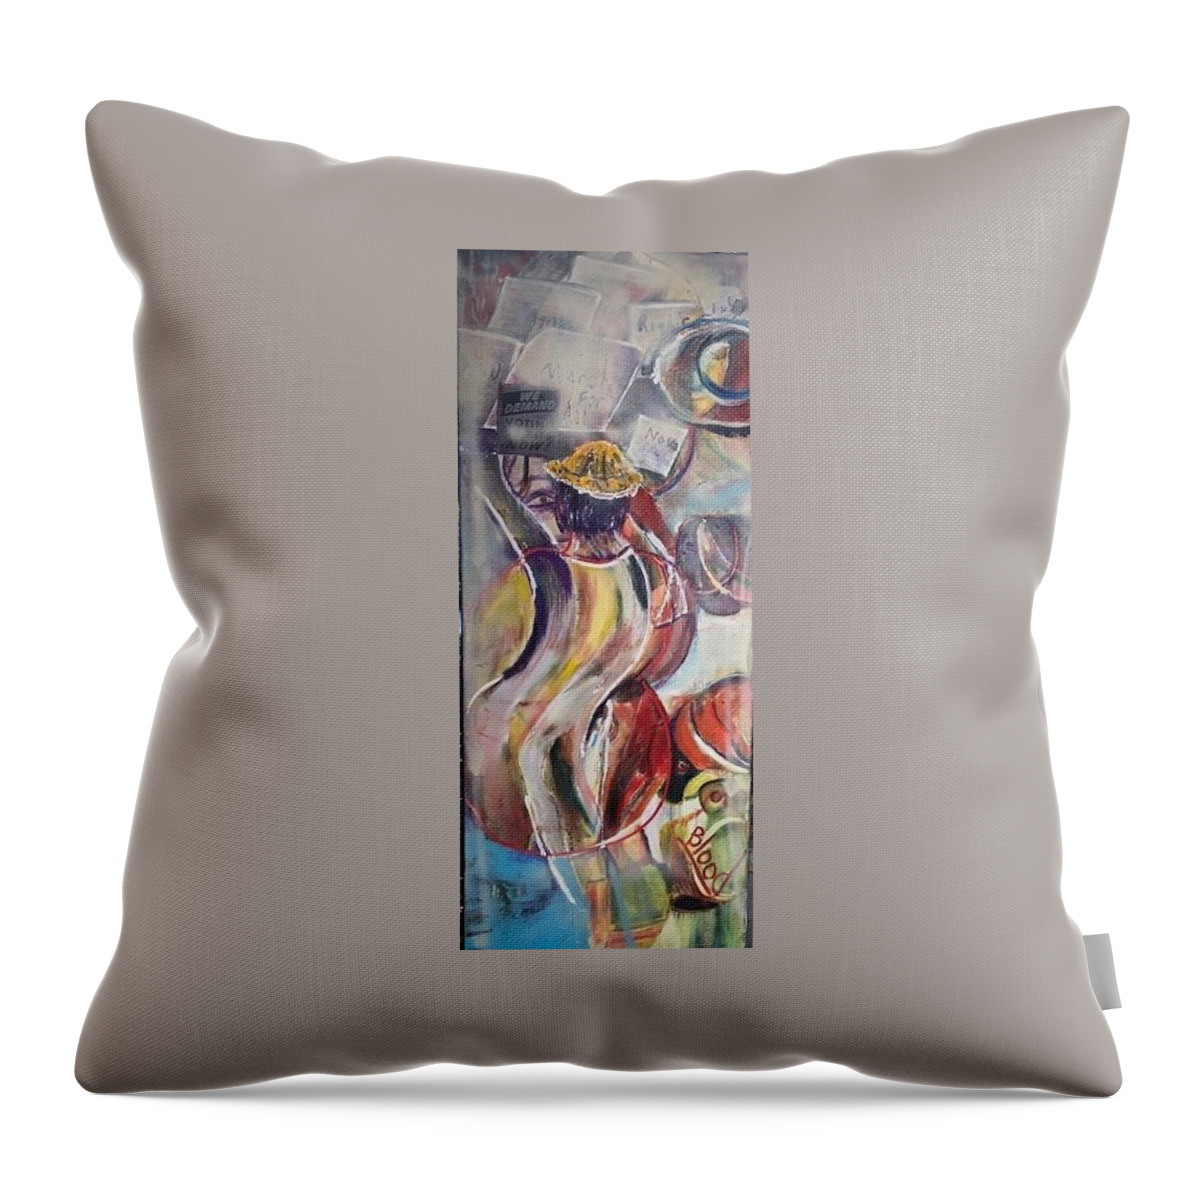 Demonstration Throw Pillow featuring the painting The Time is Now by Peggy Blood